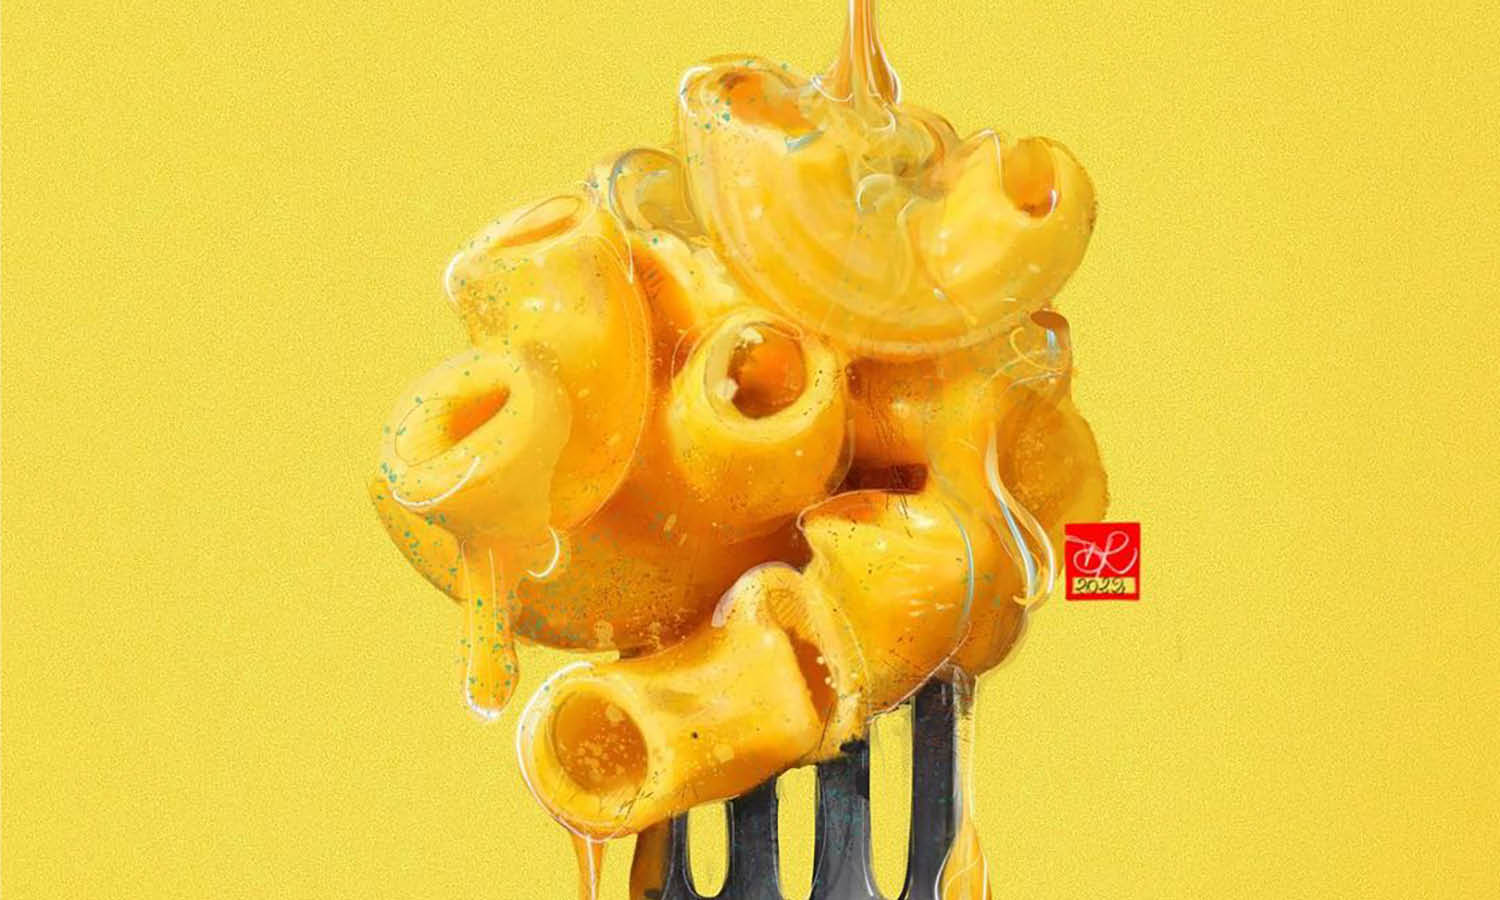 30 Best Cheese Illustration Ideas You Should Check